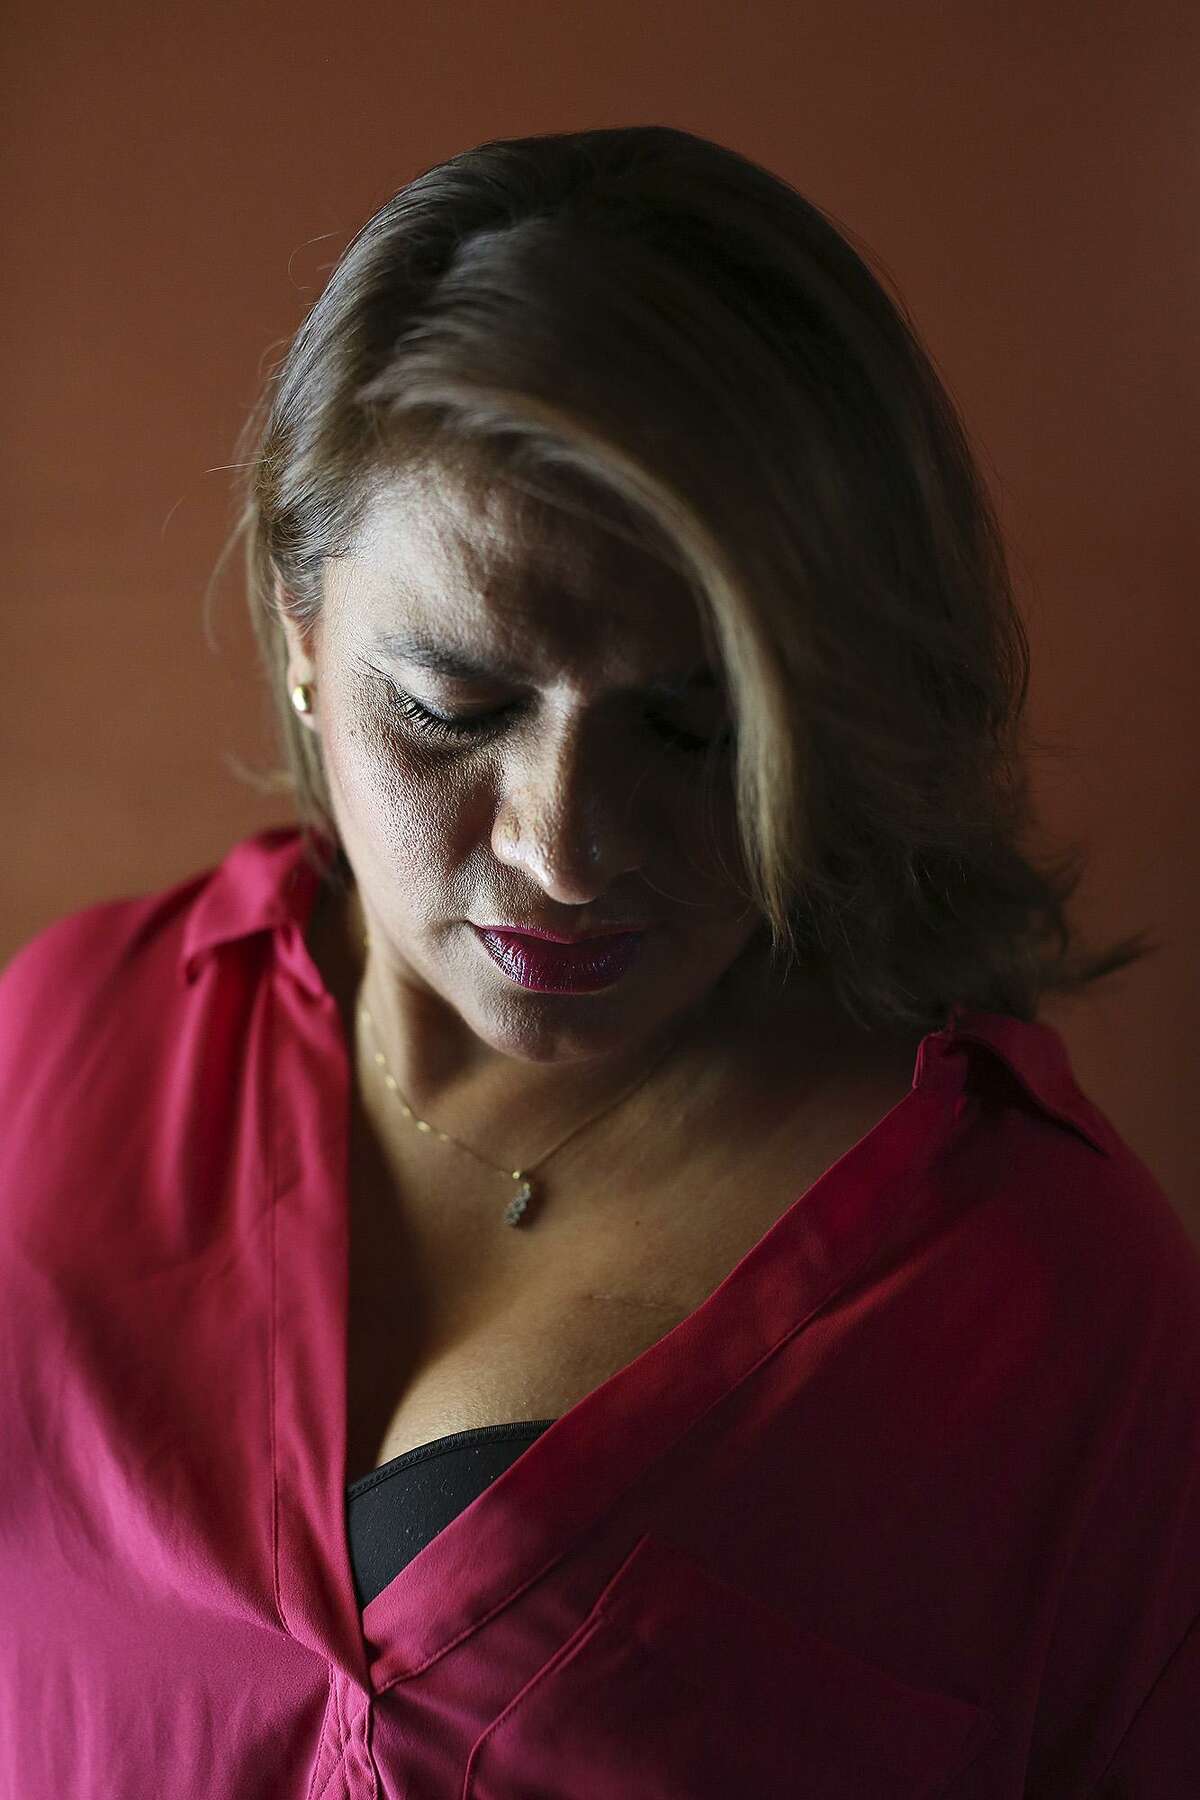 Lilia Rios, who is in the process of breast reconstruction after a double mastectomy, at her home in San Antonio on Tuesday, Nov. 1, 2016.